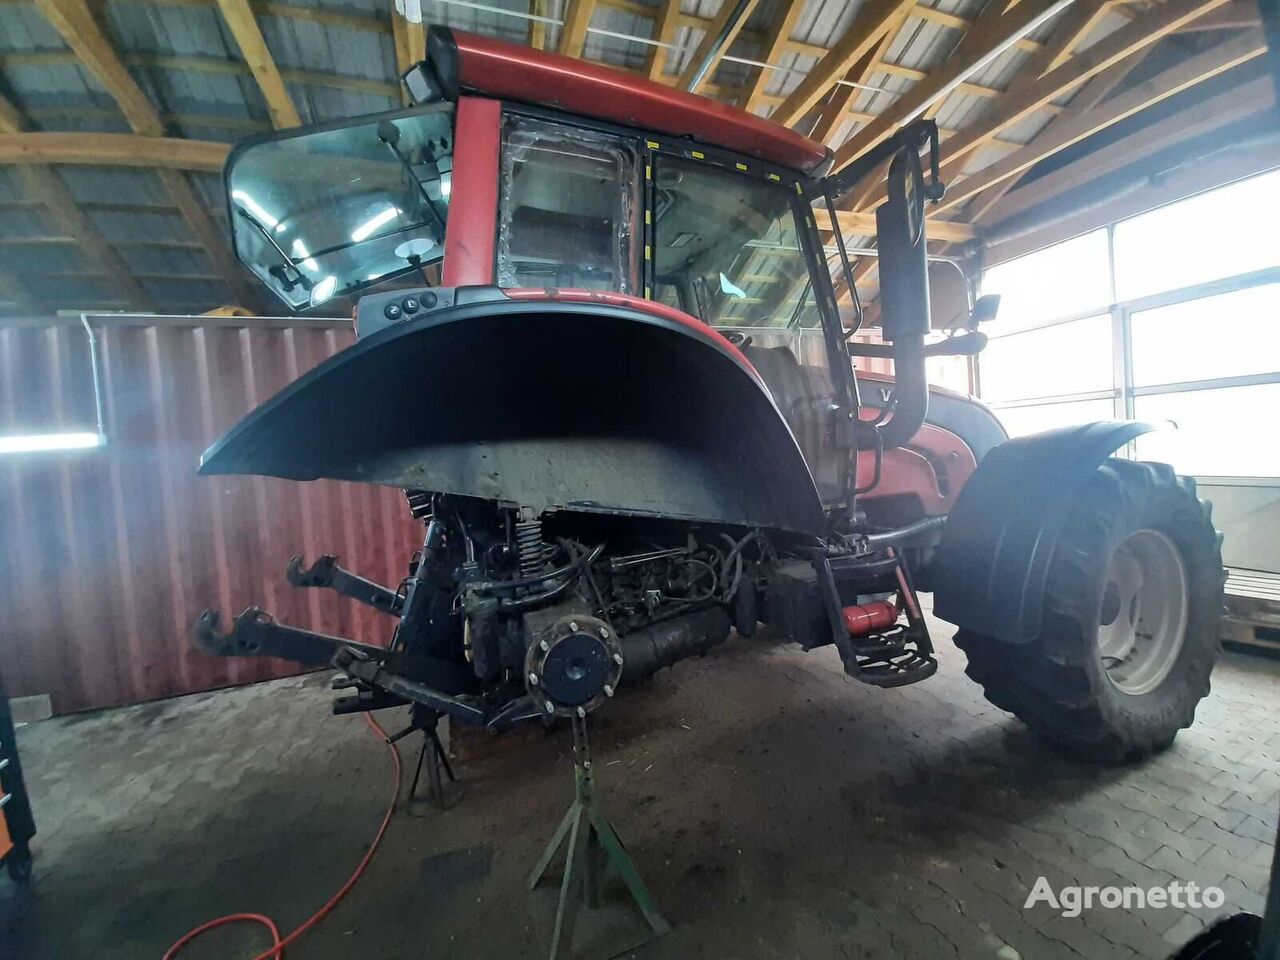 Repairs and overhauls of VALTRA tractors, PALMS trailers, agricultural machinery